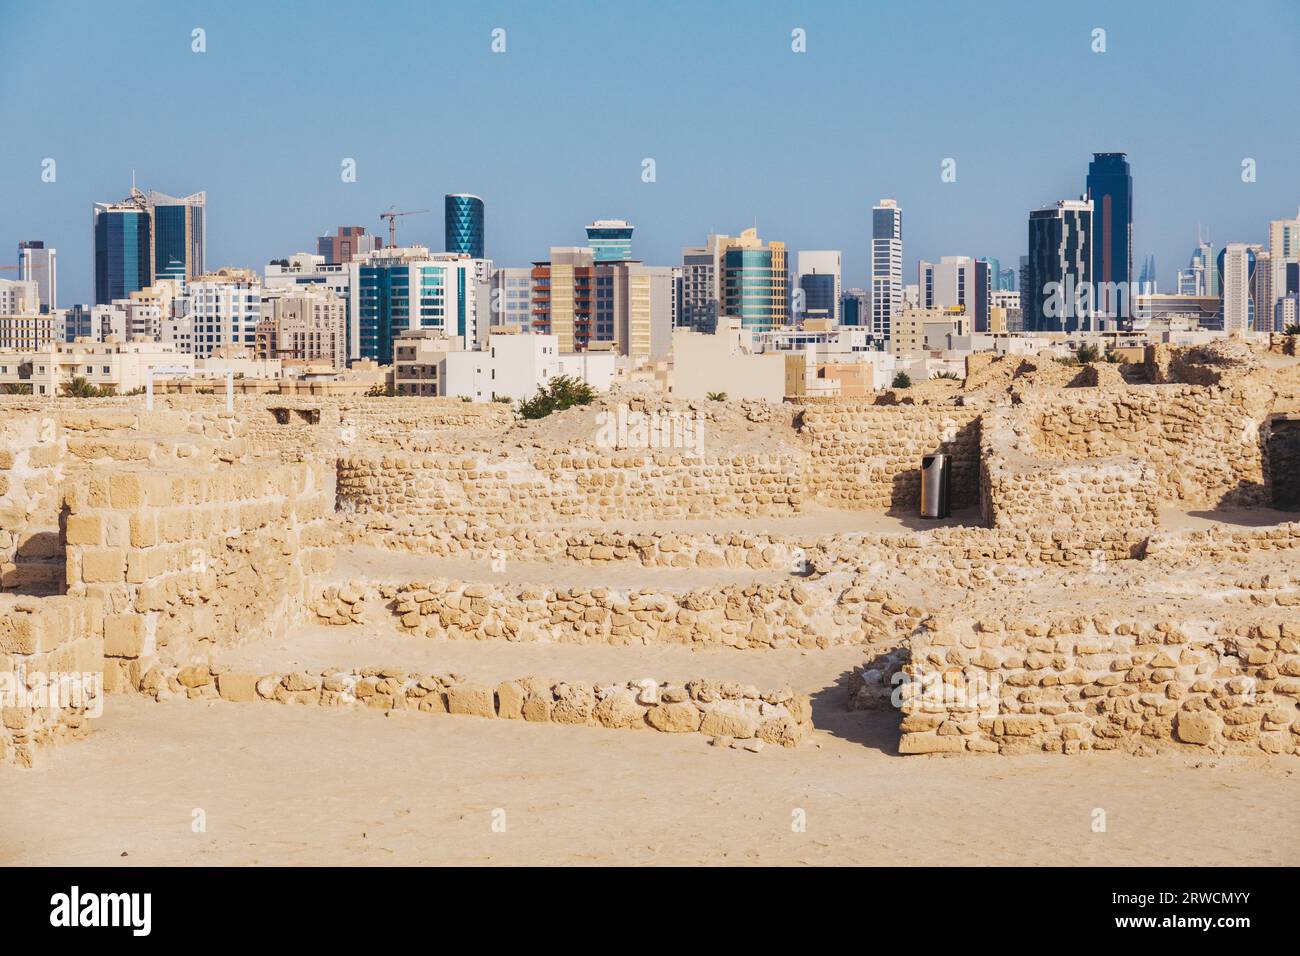 Old and new: the ruins of Bahrain Fort, dating back to 2300 BCE, against the modern skyline of downtown Manama city Stock Photo